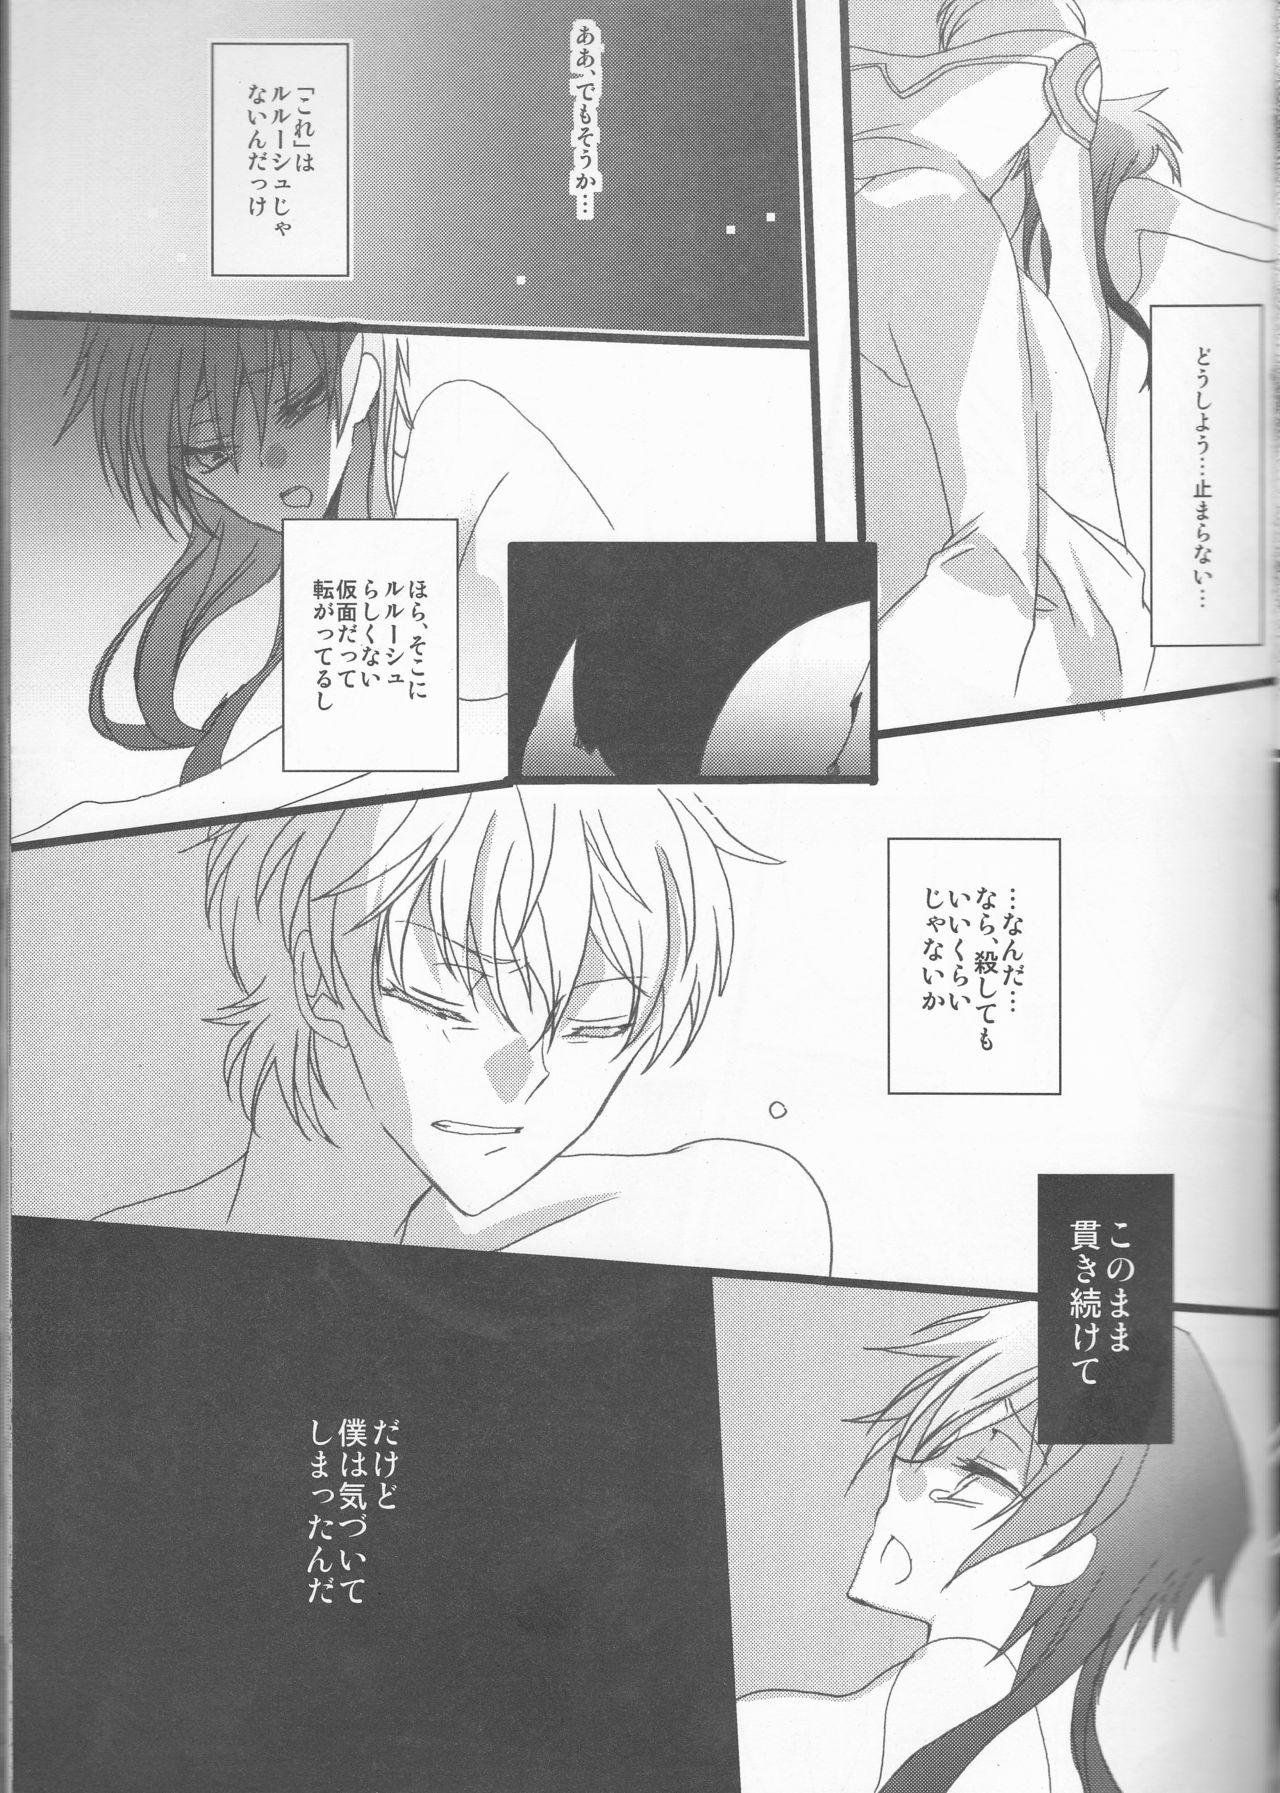 Hard MASK - Code geass Pounded - Page 8